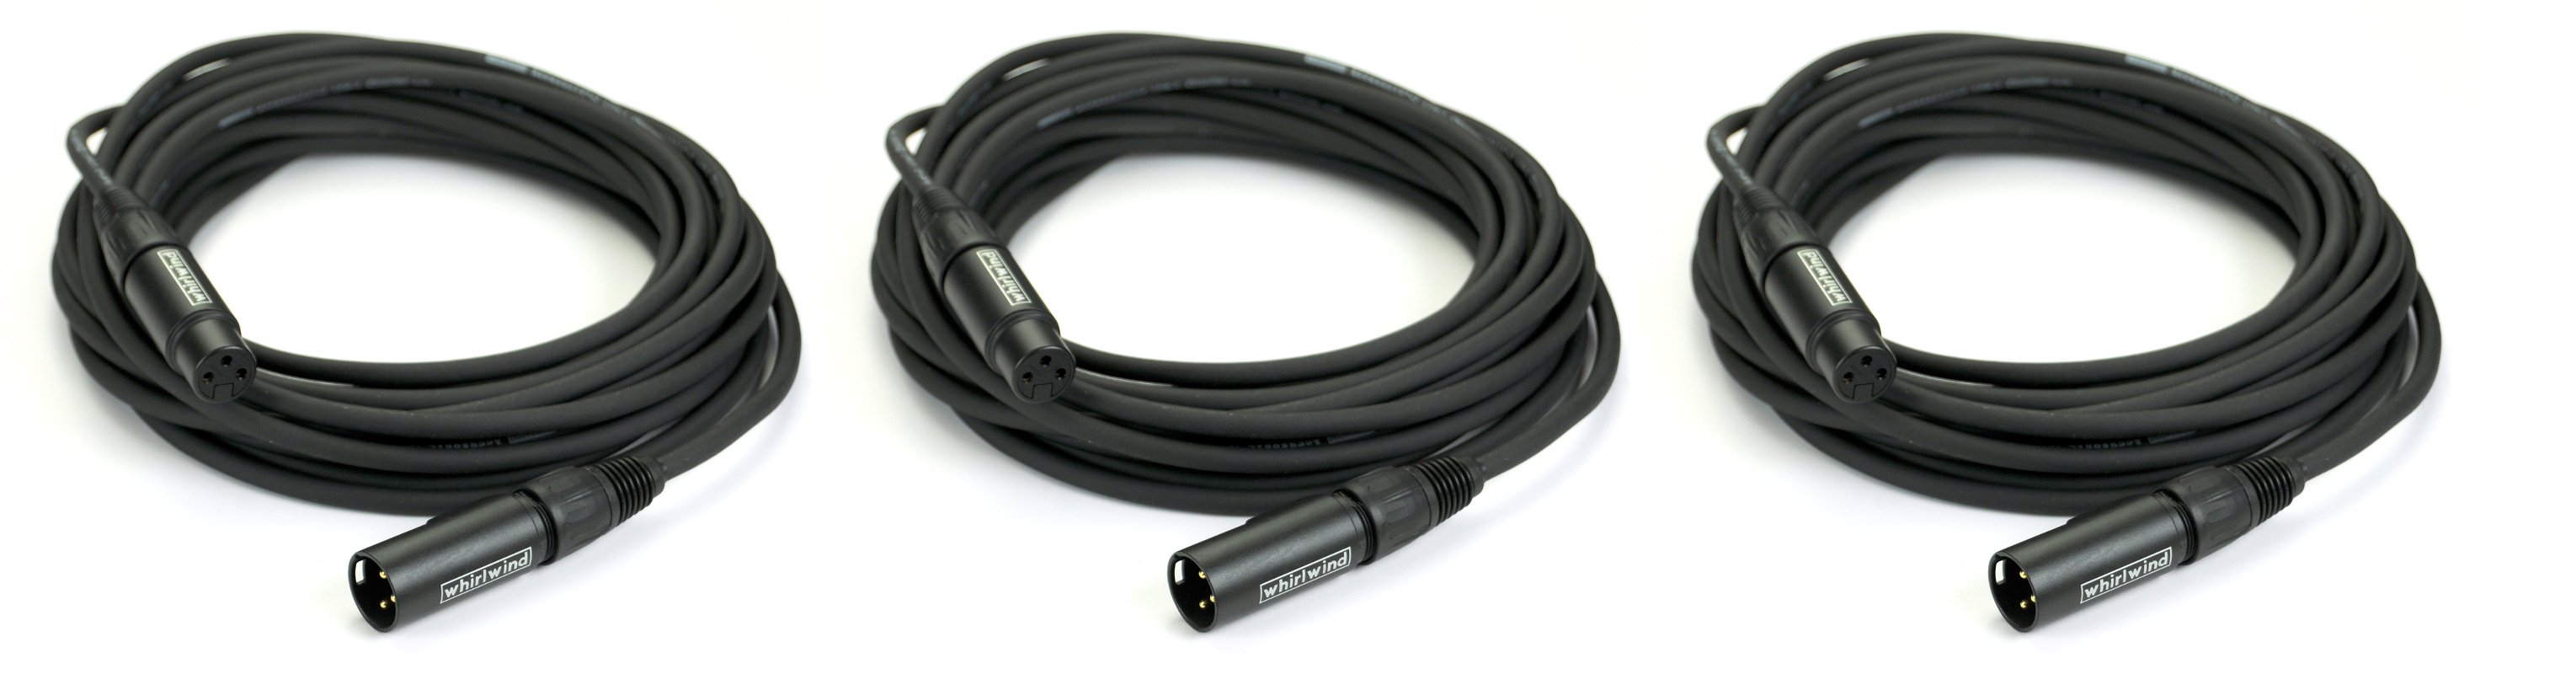 Whirlwind MK425-PK3-K Microphone Cable Bundle with 3 MK425 XLR Microphone Cables - Picture 1 of 1